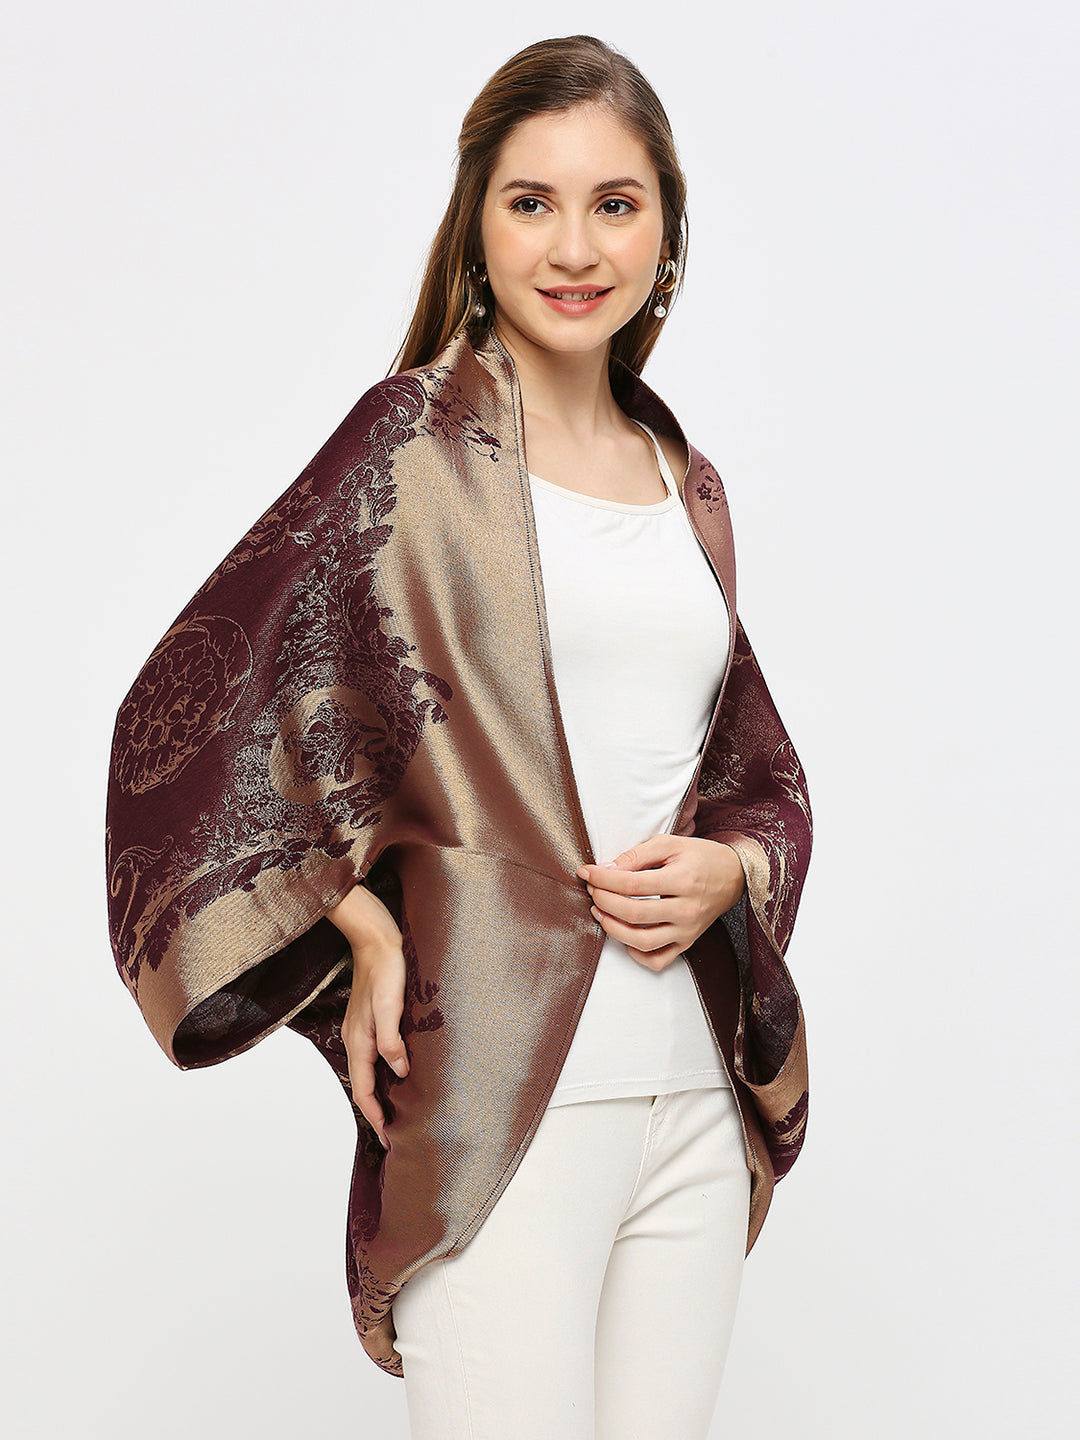 Brocade French Patterned Wine Cape